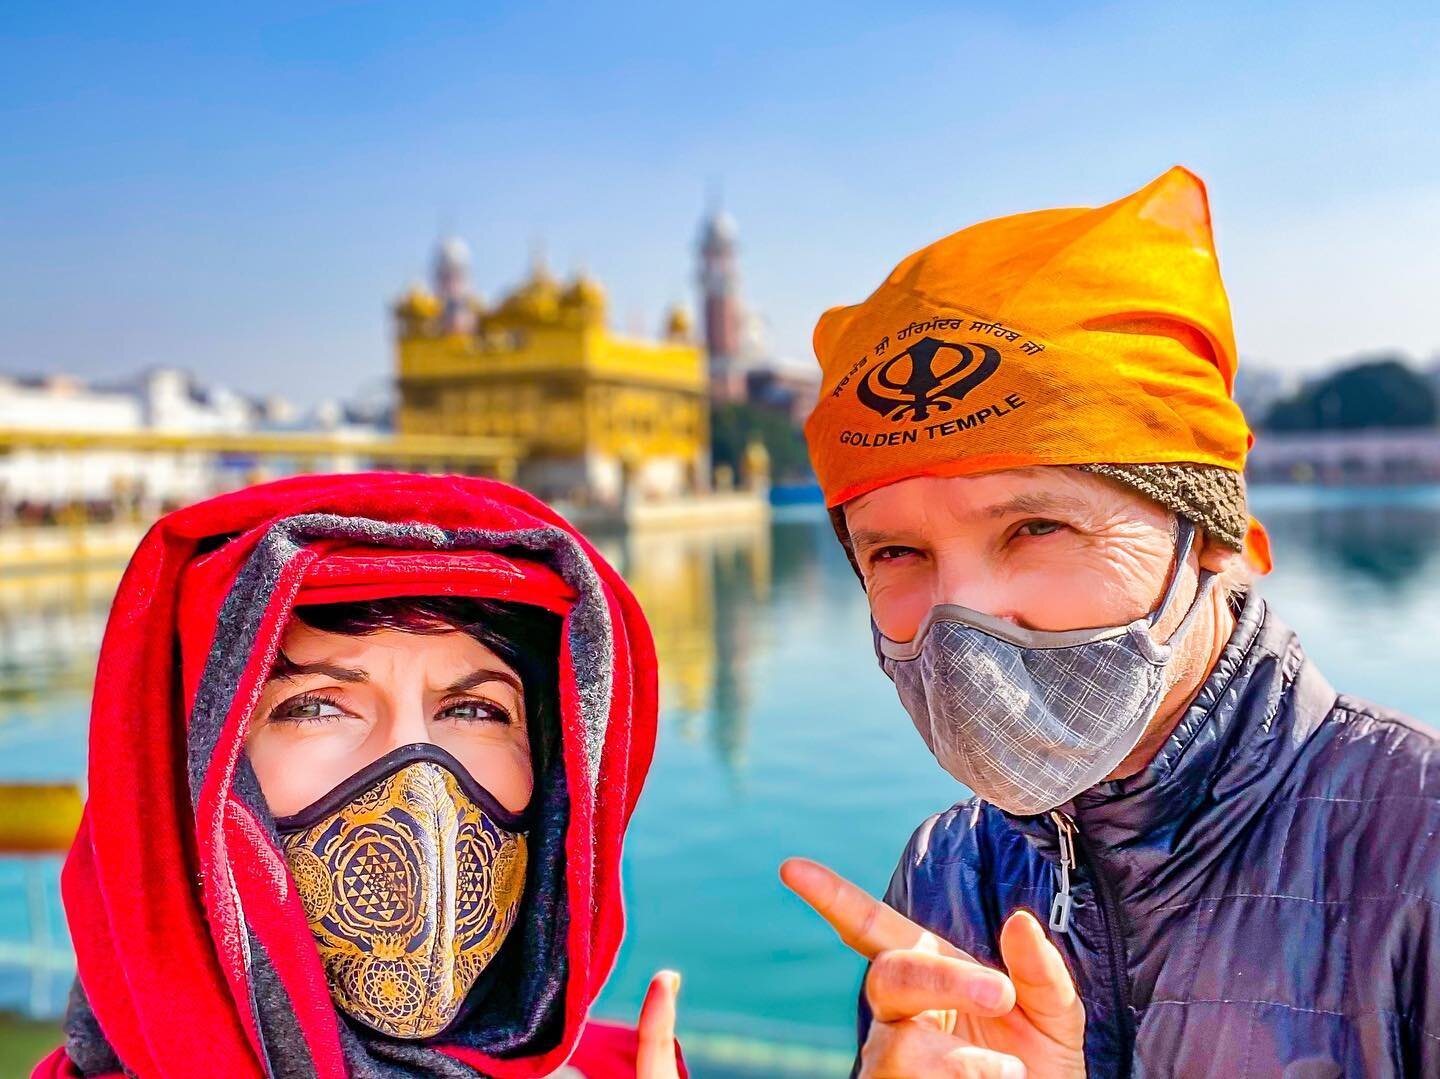 Golden Temple, Amritsar 🇮🇳 👳🏼&zwj;♂️👳🏻
&mdash; Sacred Home of the Sikh 
&mdash; Our Kundalini Practices inspired us to come here and soak in this Holy City. 
&mdash; India was absolutely unforgettable. 
&mdash; Photos of Amritsar coming soon. 
